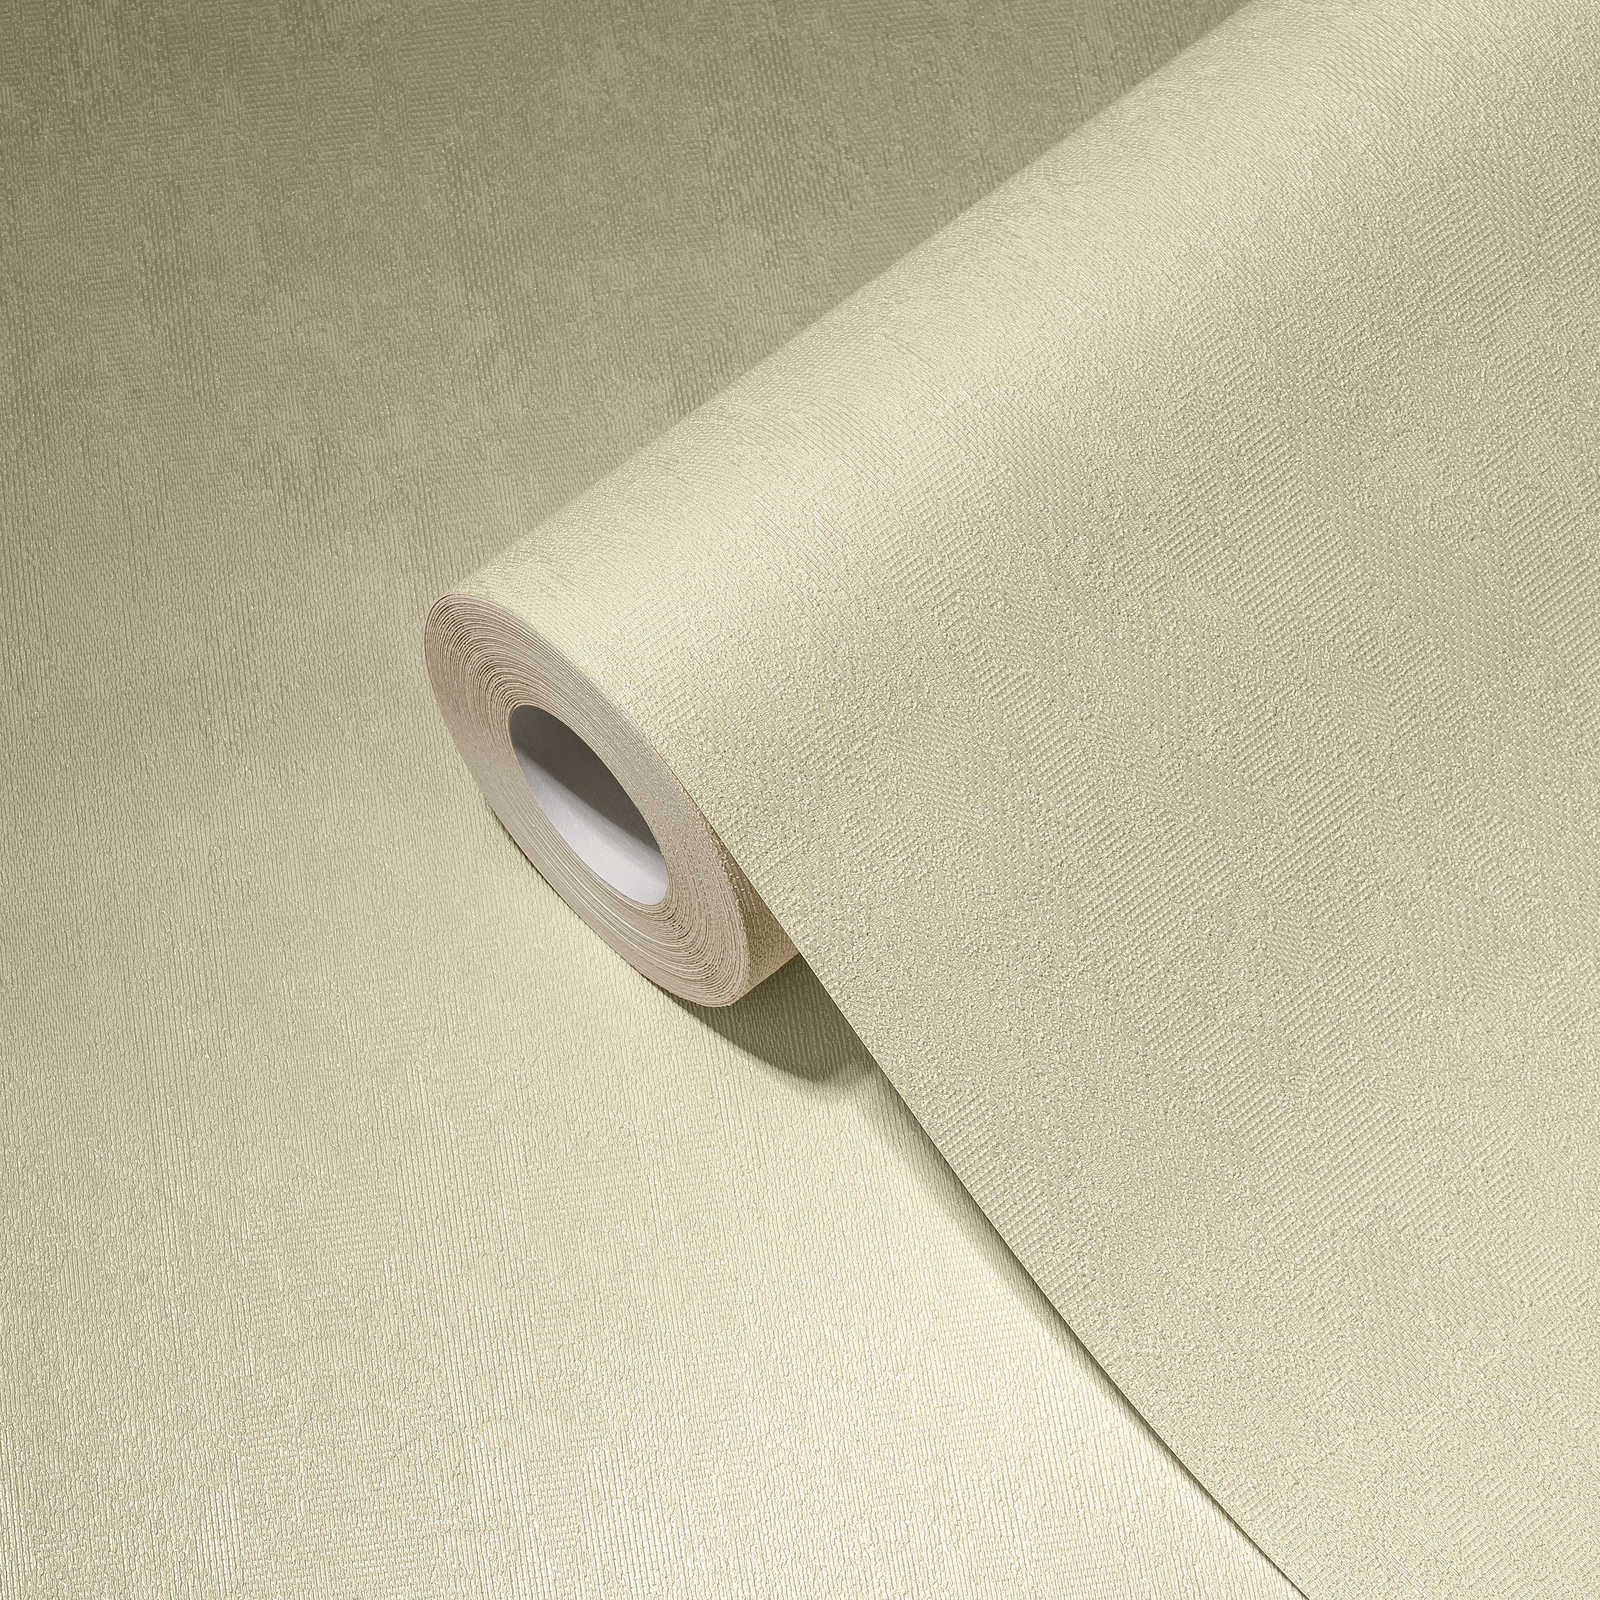             Neutral plain wallpaper with textured surface - cream
        